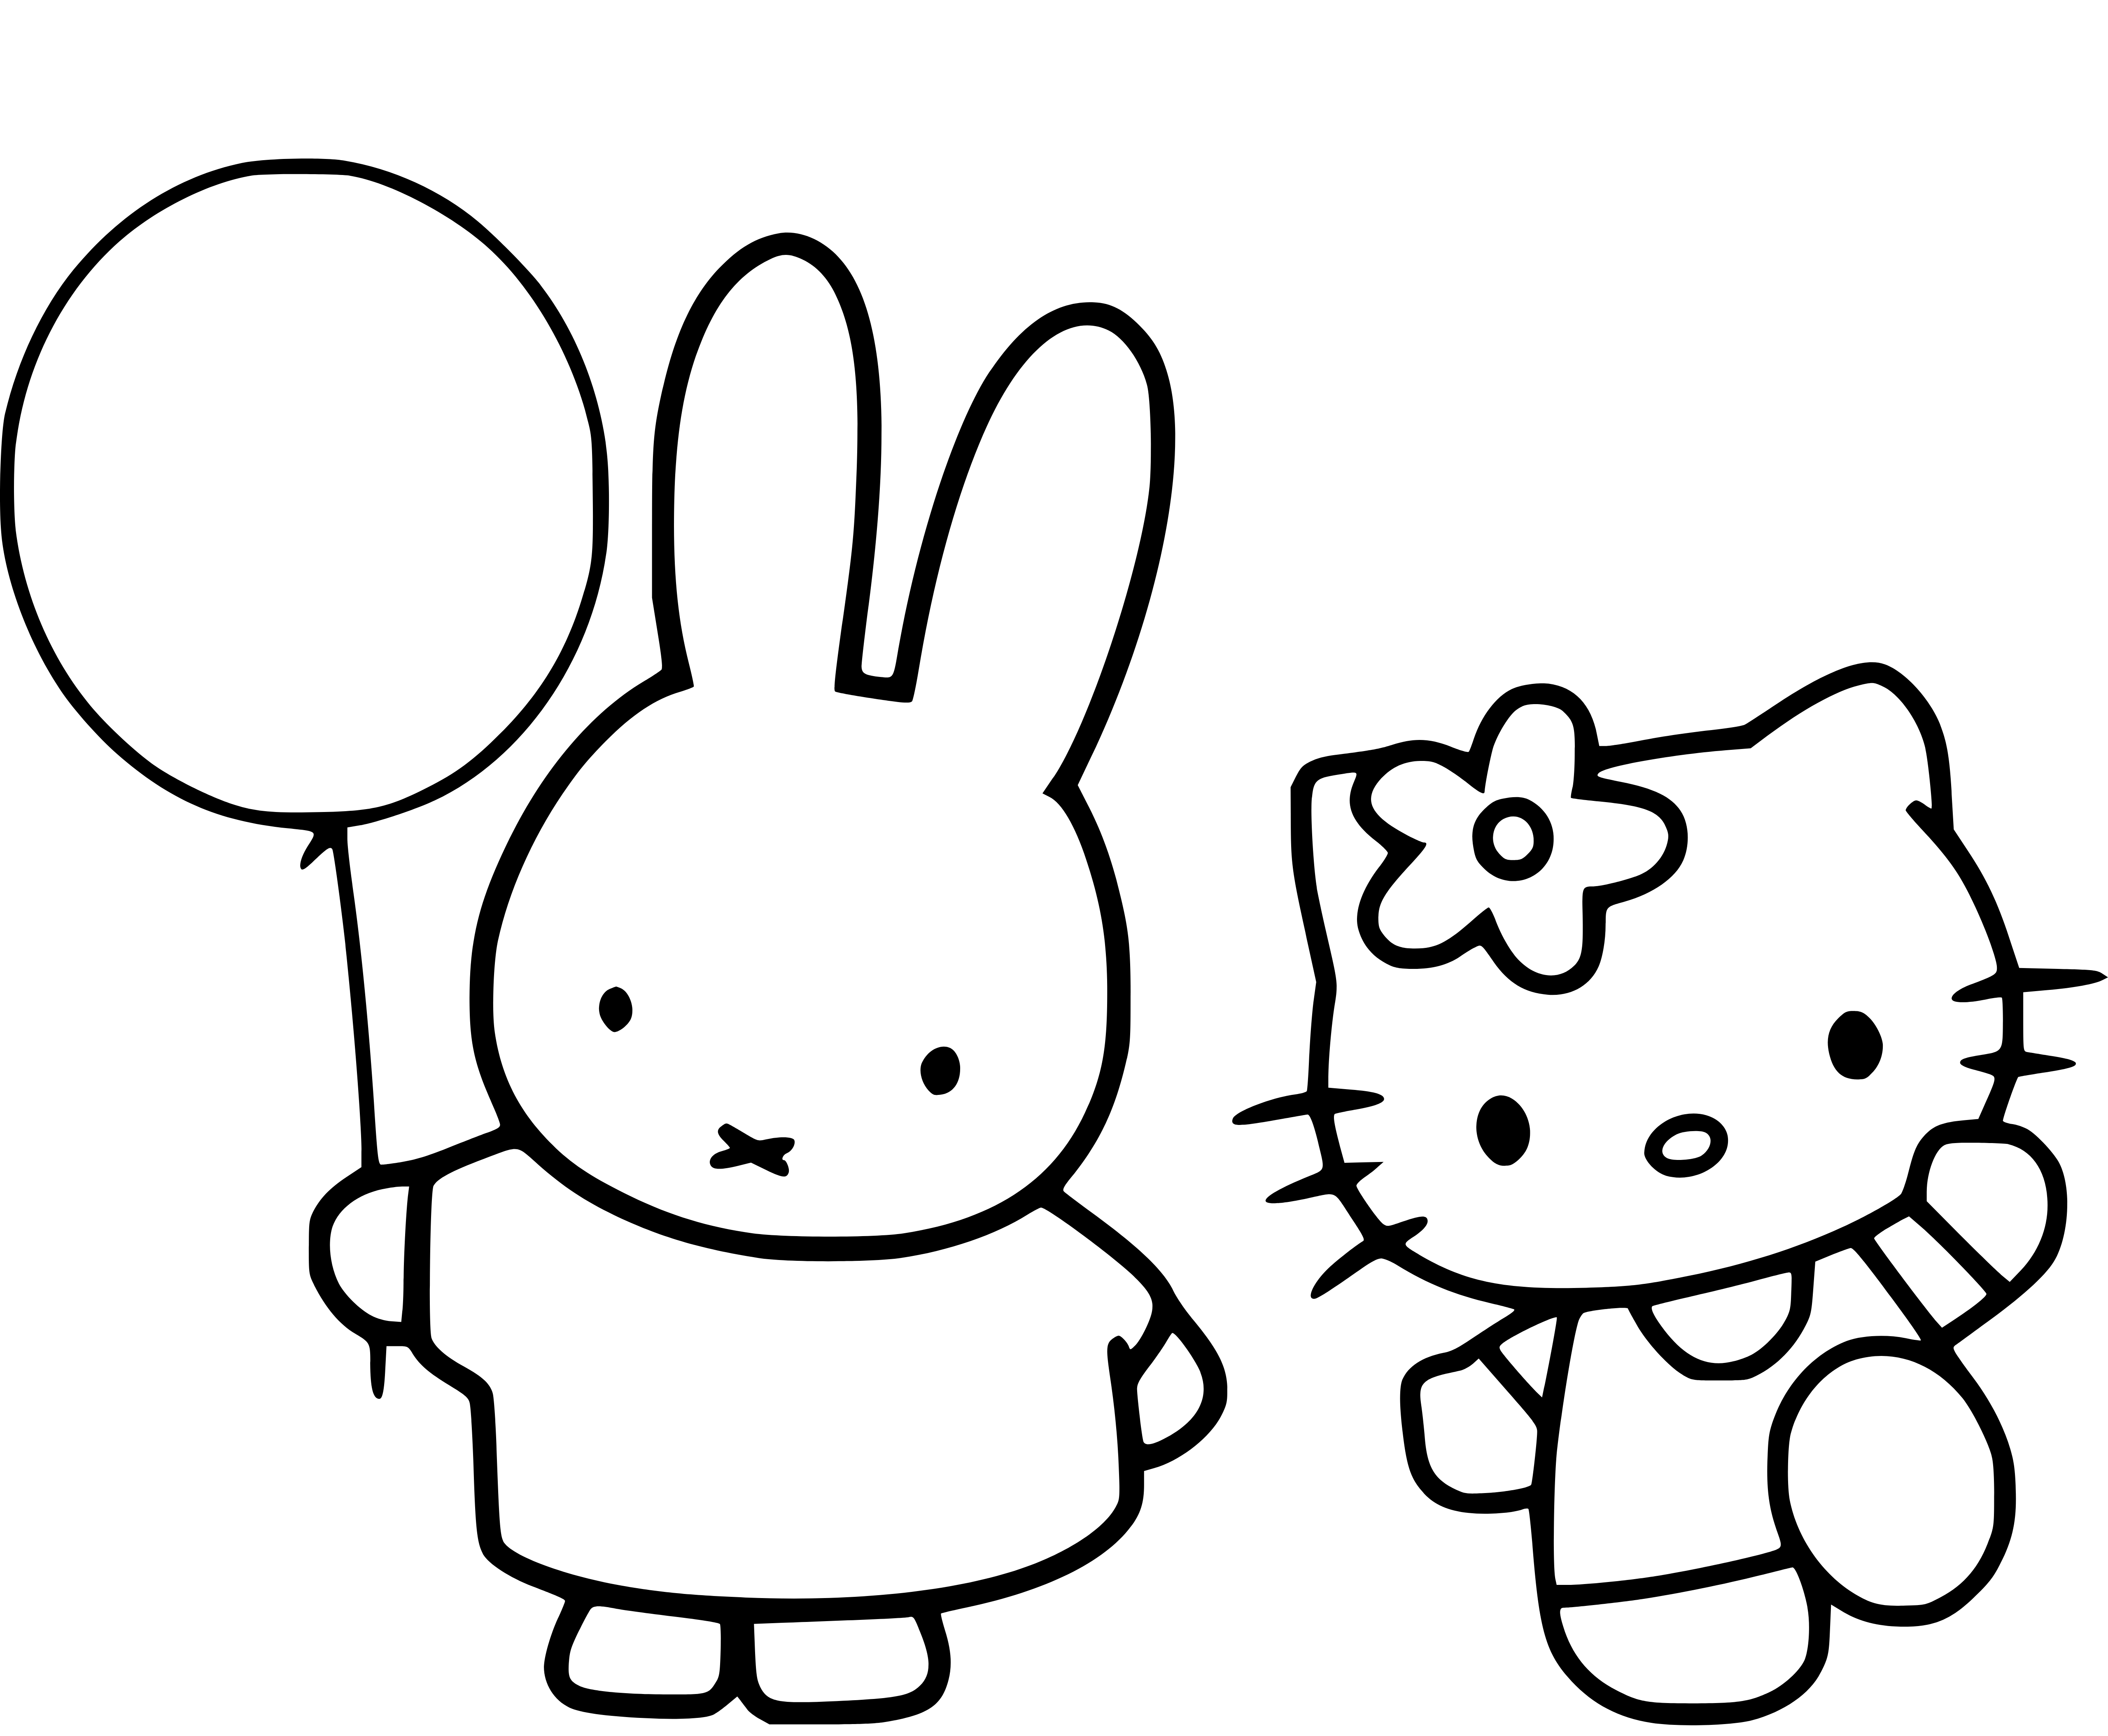 Hello Kitty and a Bunny  Coloring Page for Kids - SheetalColor.com